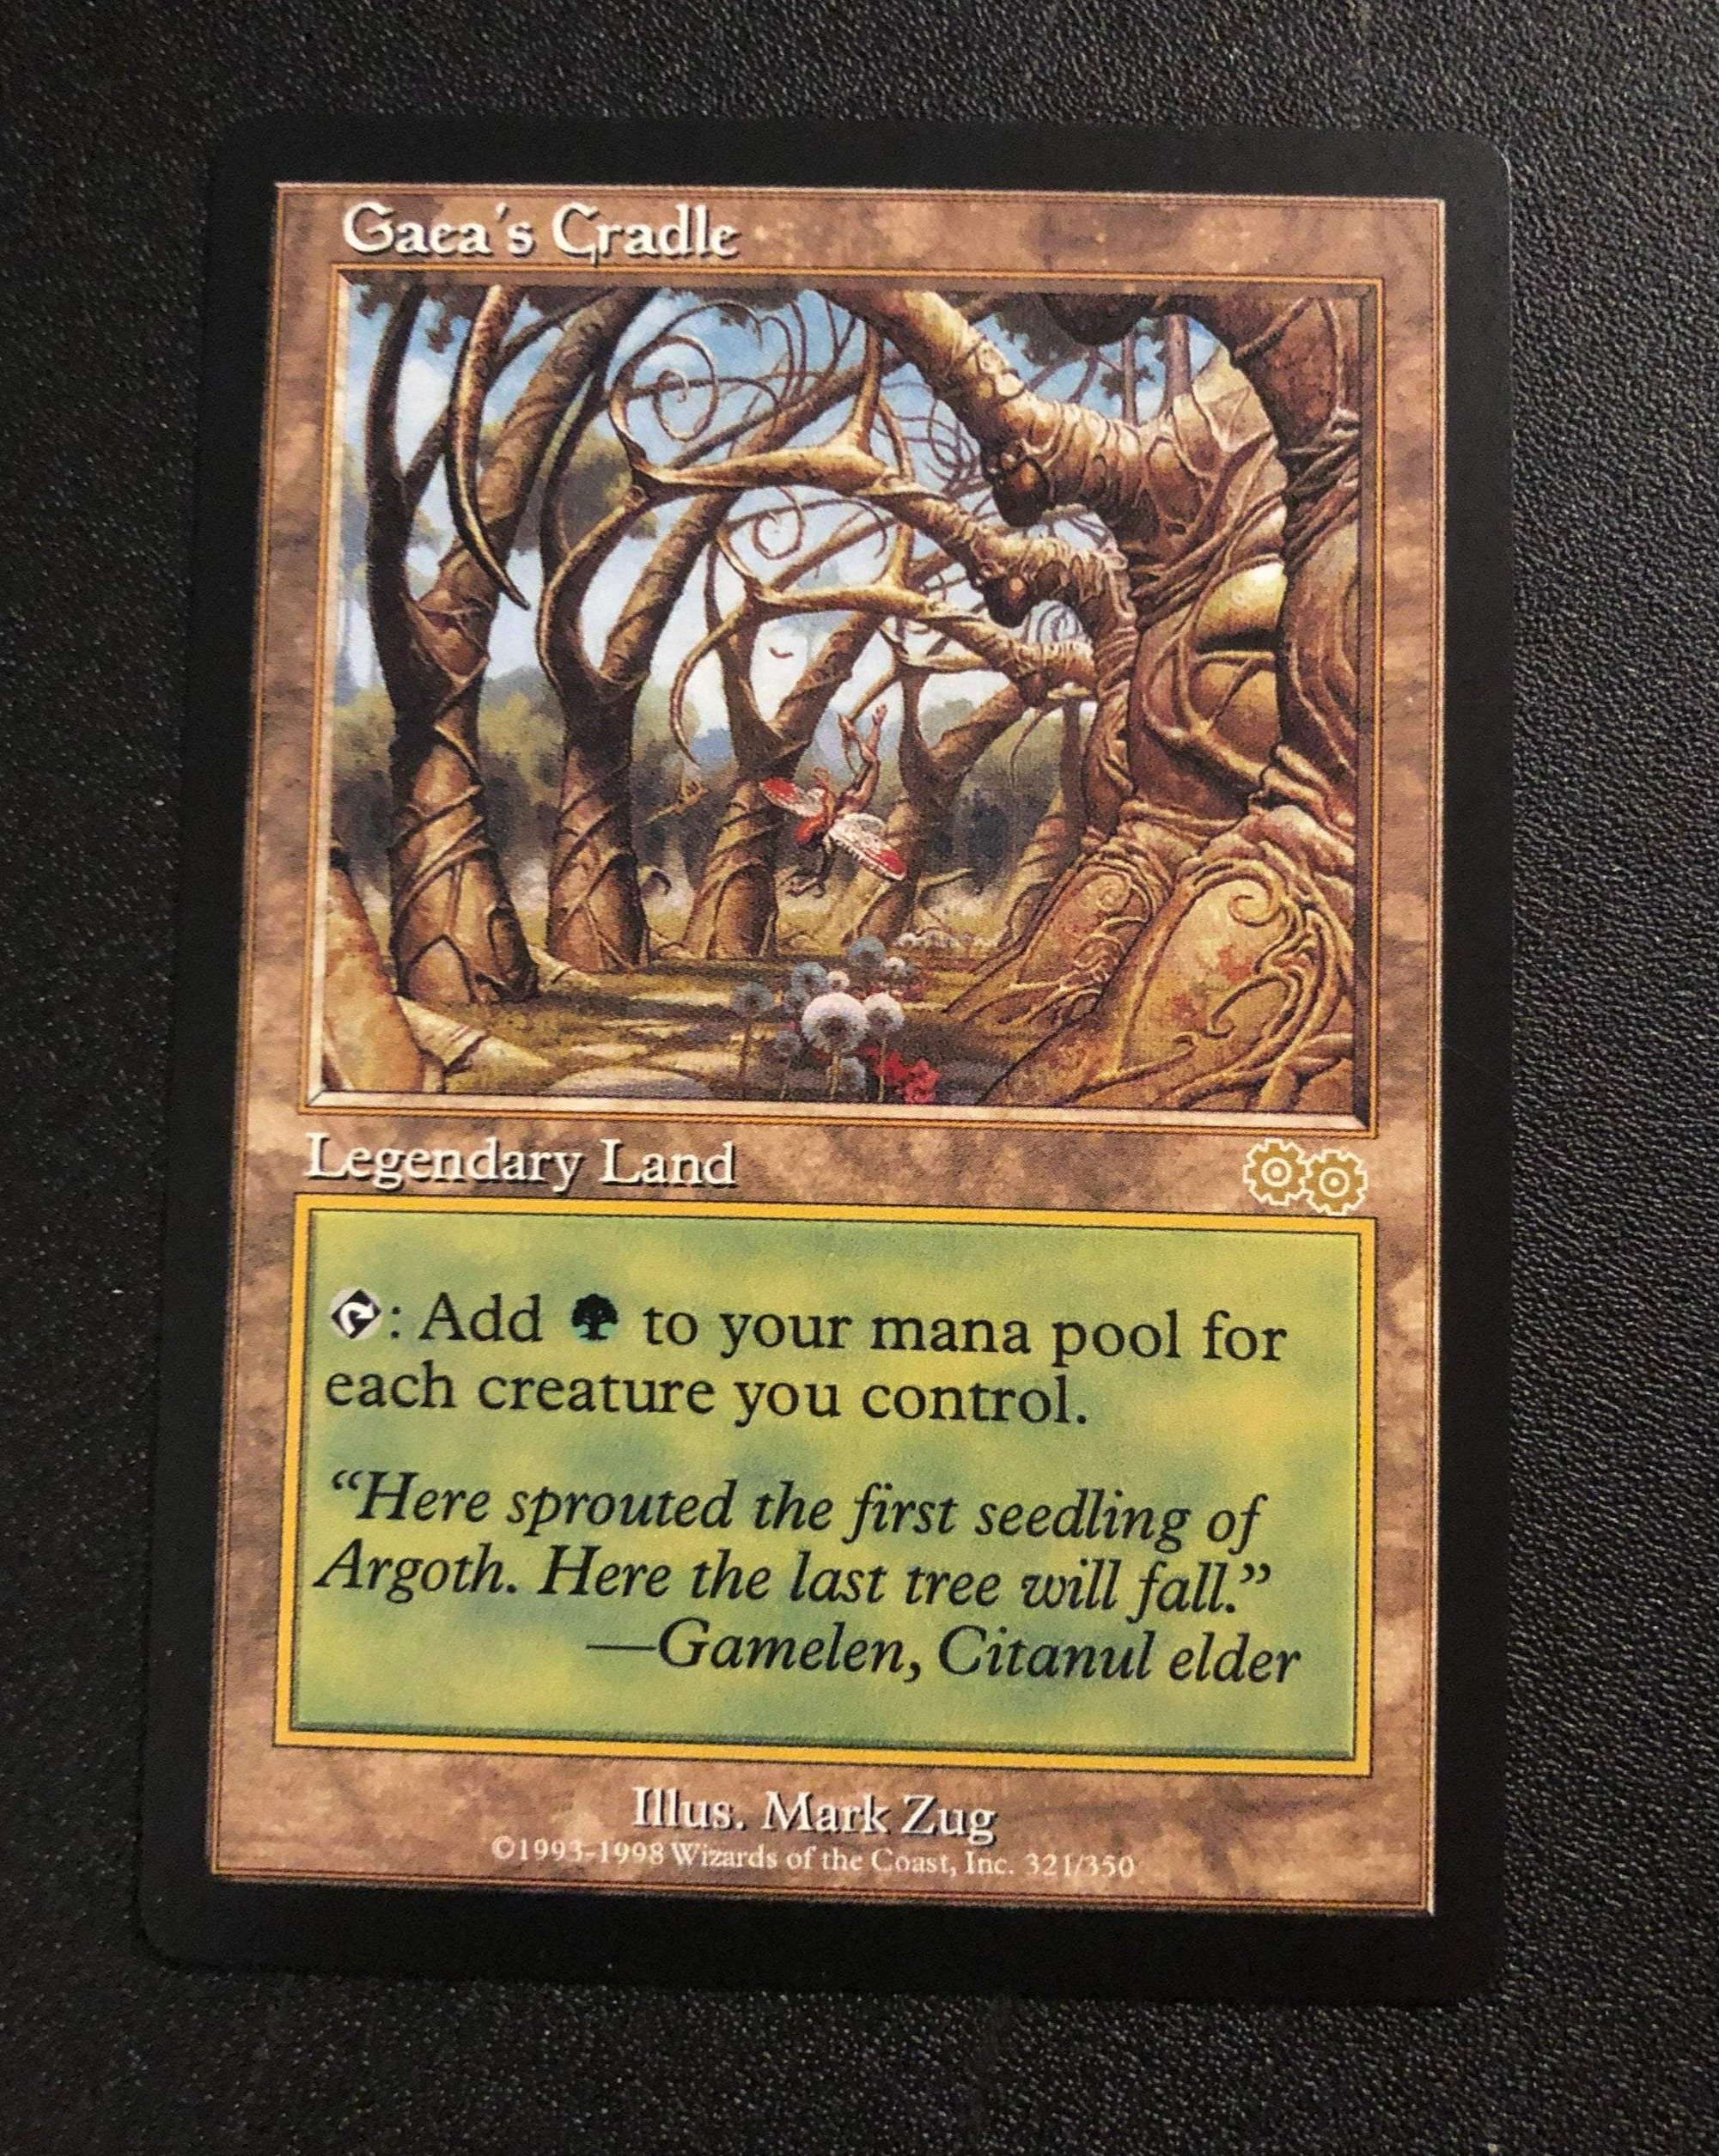 are cards from mtg cardsmith legal to use